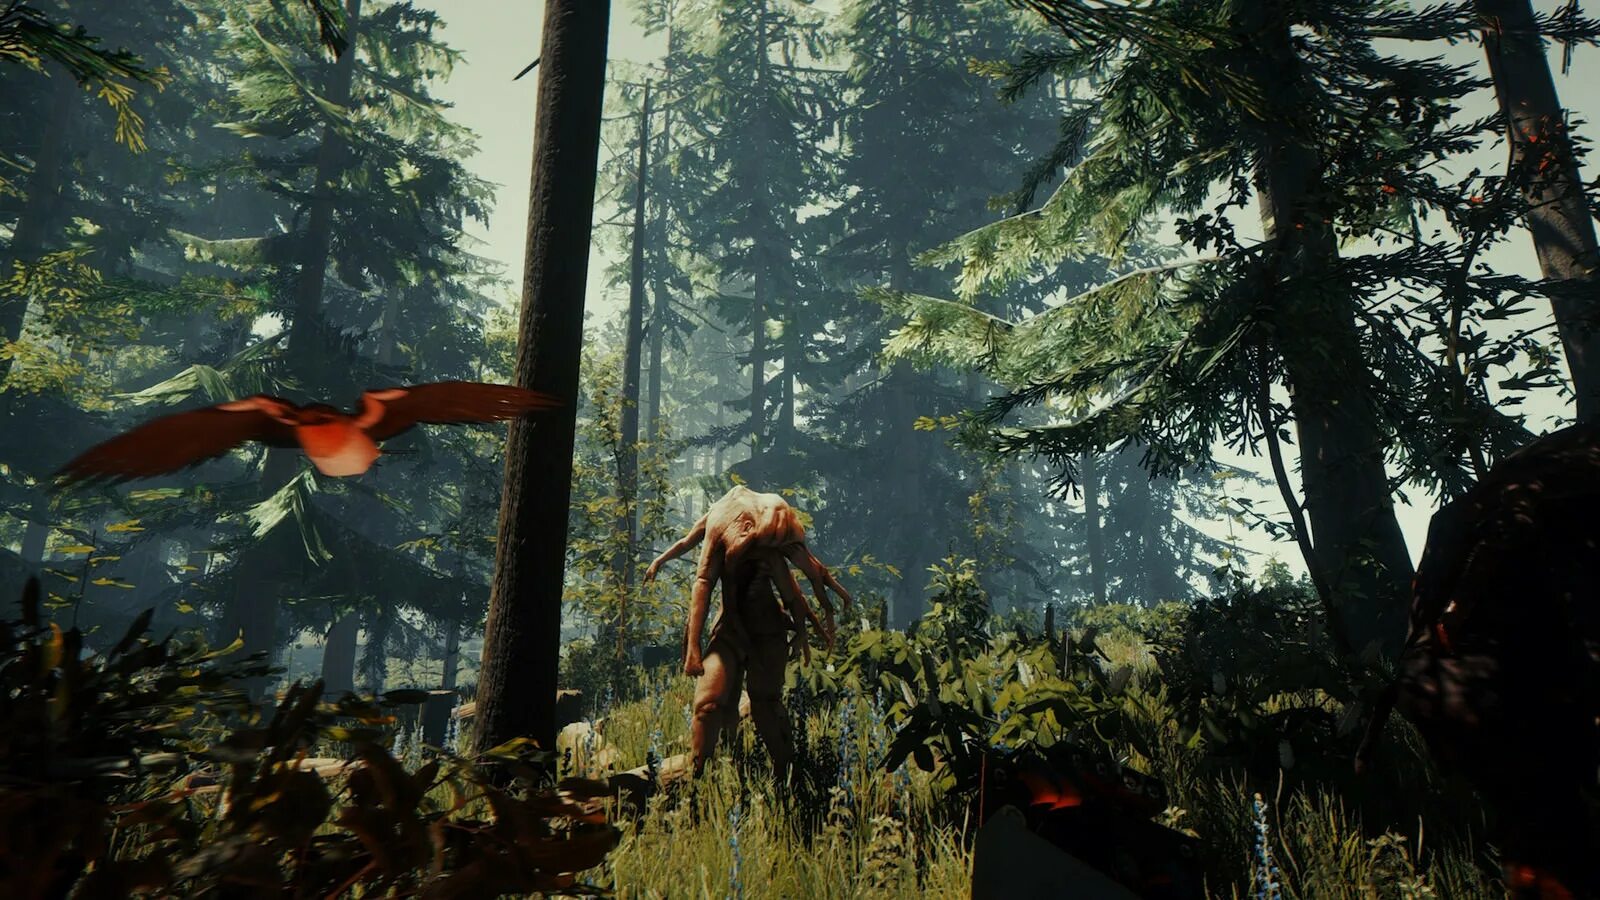 The forest револьвер. Forest 2 игра. The Forest игра на ps4. The Forest 2008. Зе Форест ВР.